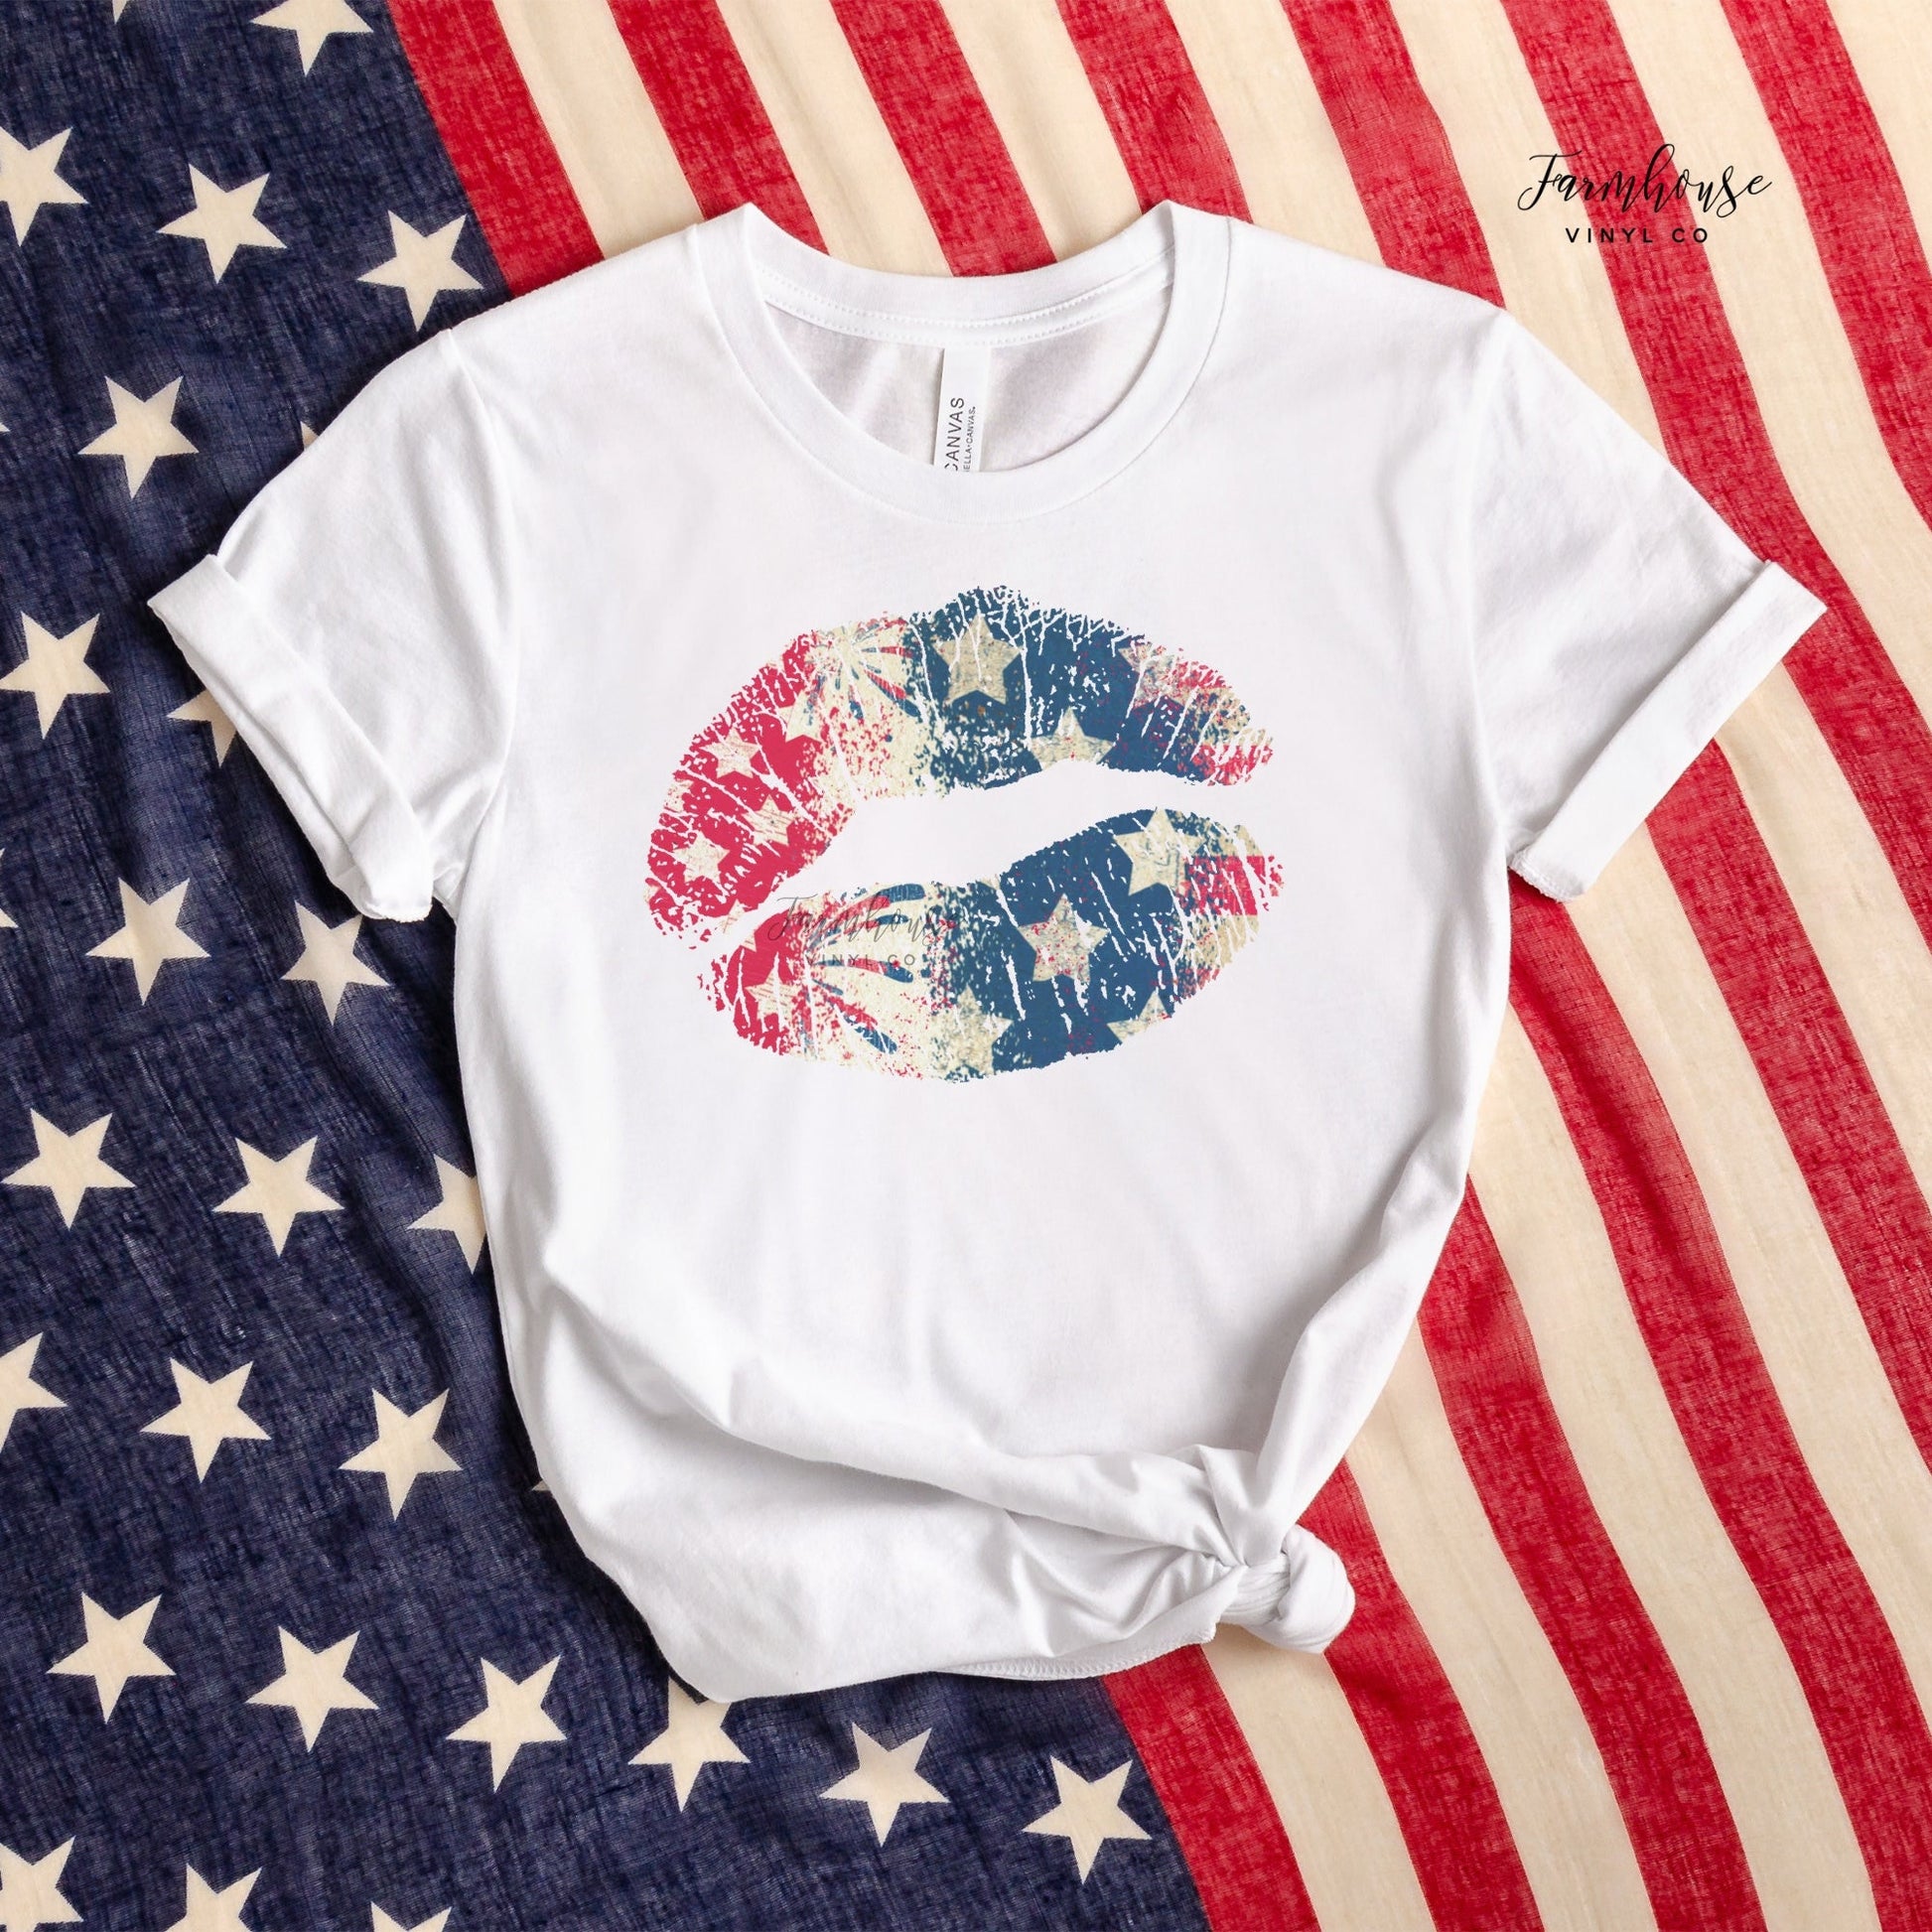 Stars and Stripes Kiss Lips Bleached Shirt / 4th of July / Independence Day Shirt / Summer BBQ Shirt / Red White Blue Kiss Lips Shirt - Farmhouse Vinyl Co